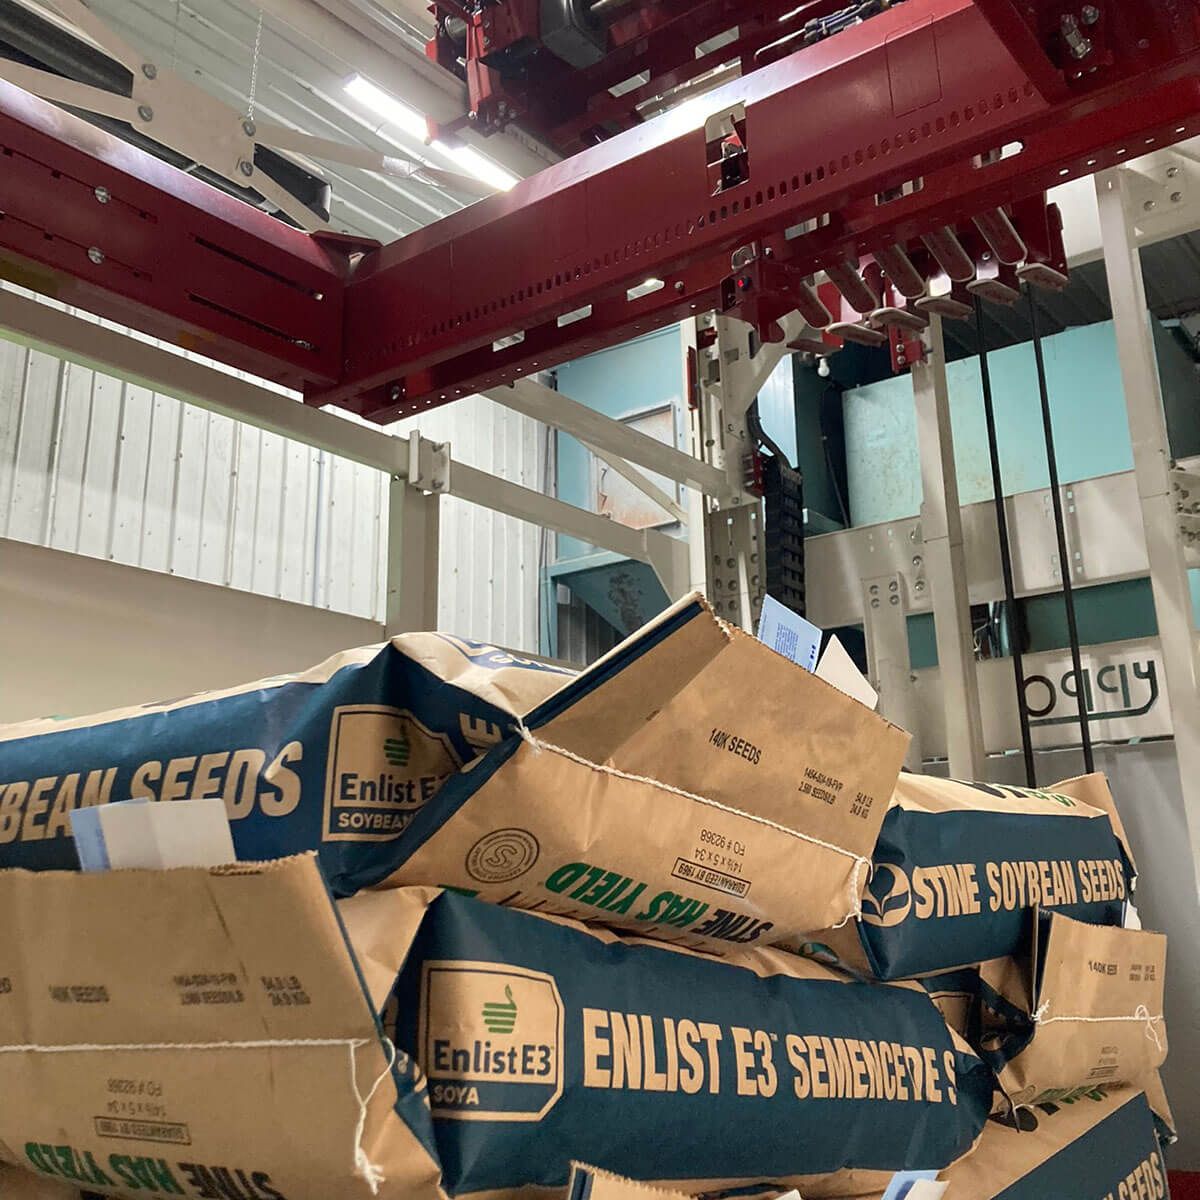 Stine Seeds bags in warehouse